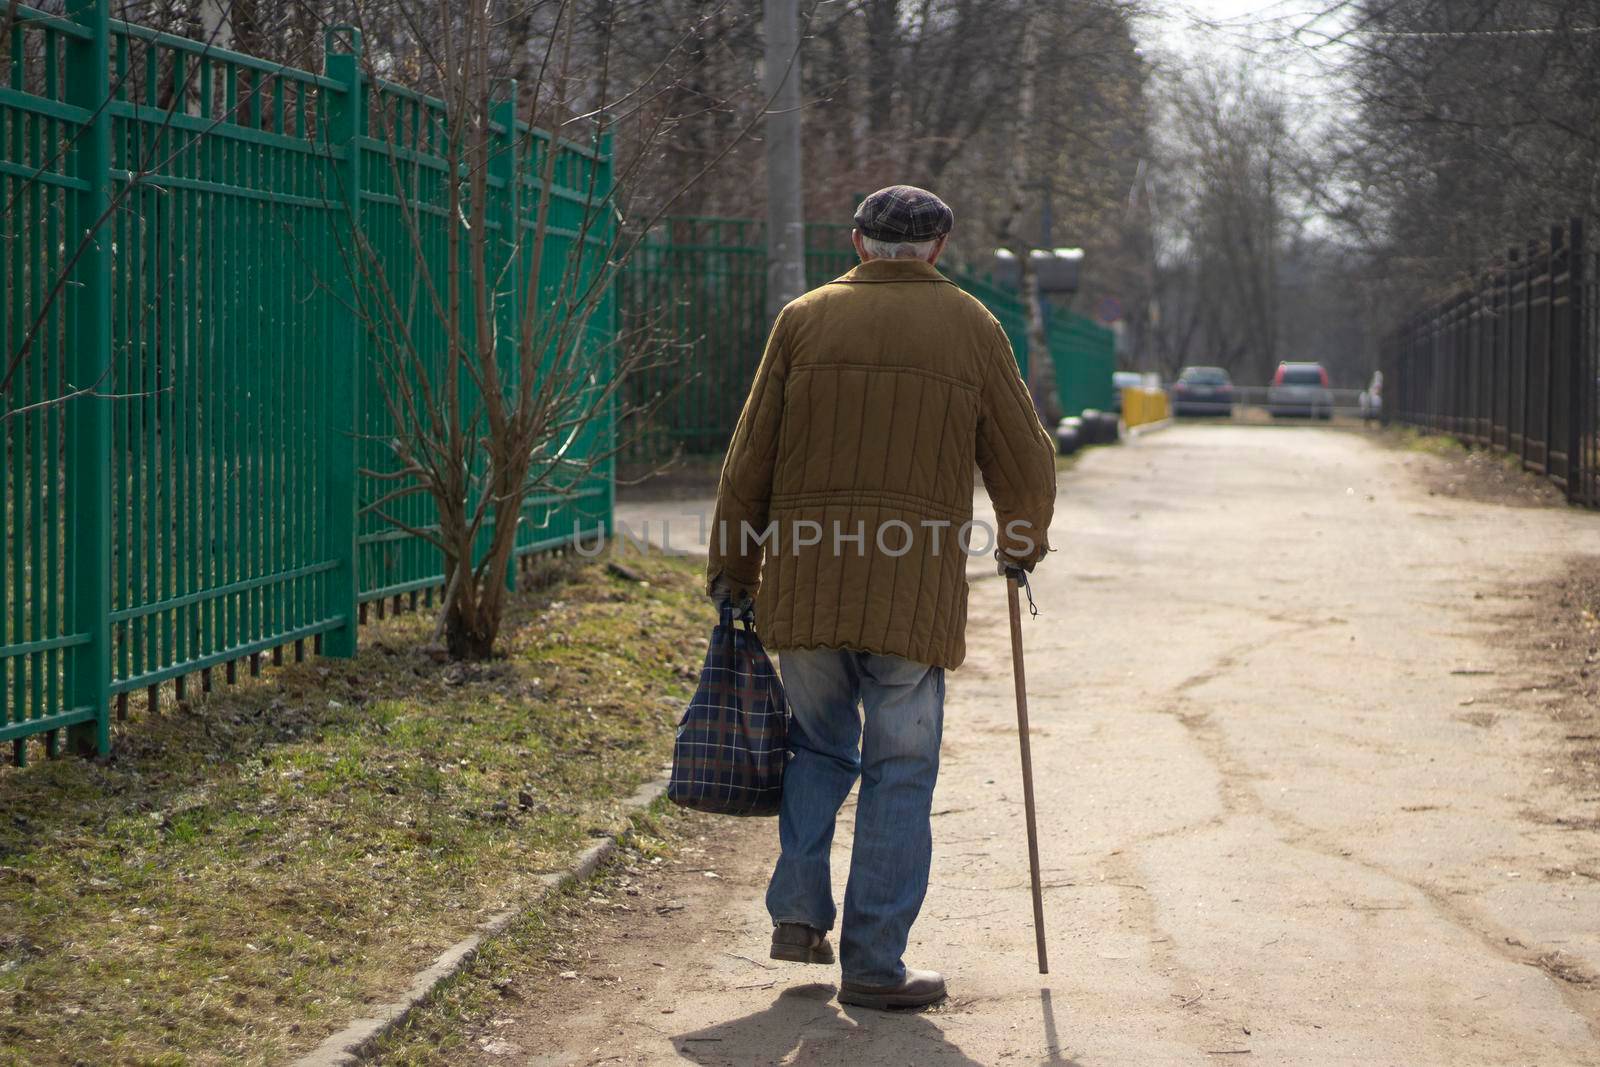 Pensioner in Russia. Poverty in world. Elderly man walks leaning on walking stick. Background man goes into distance. Old jacket and cap.